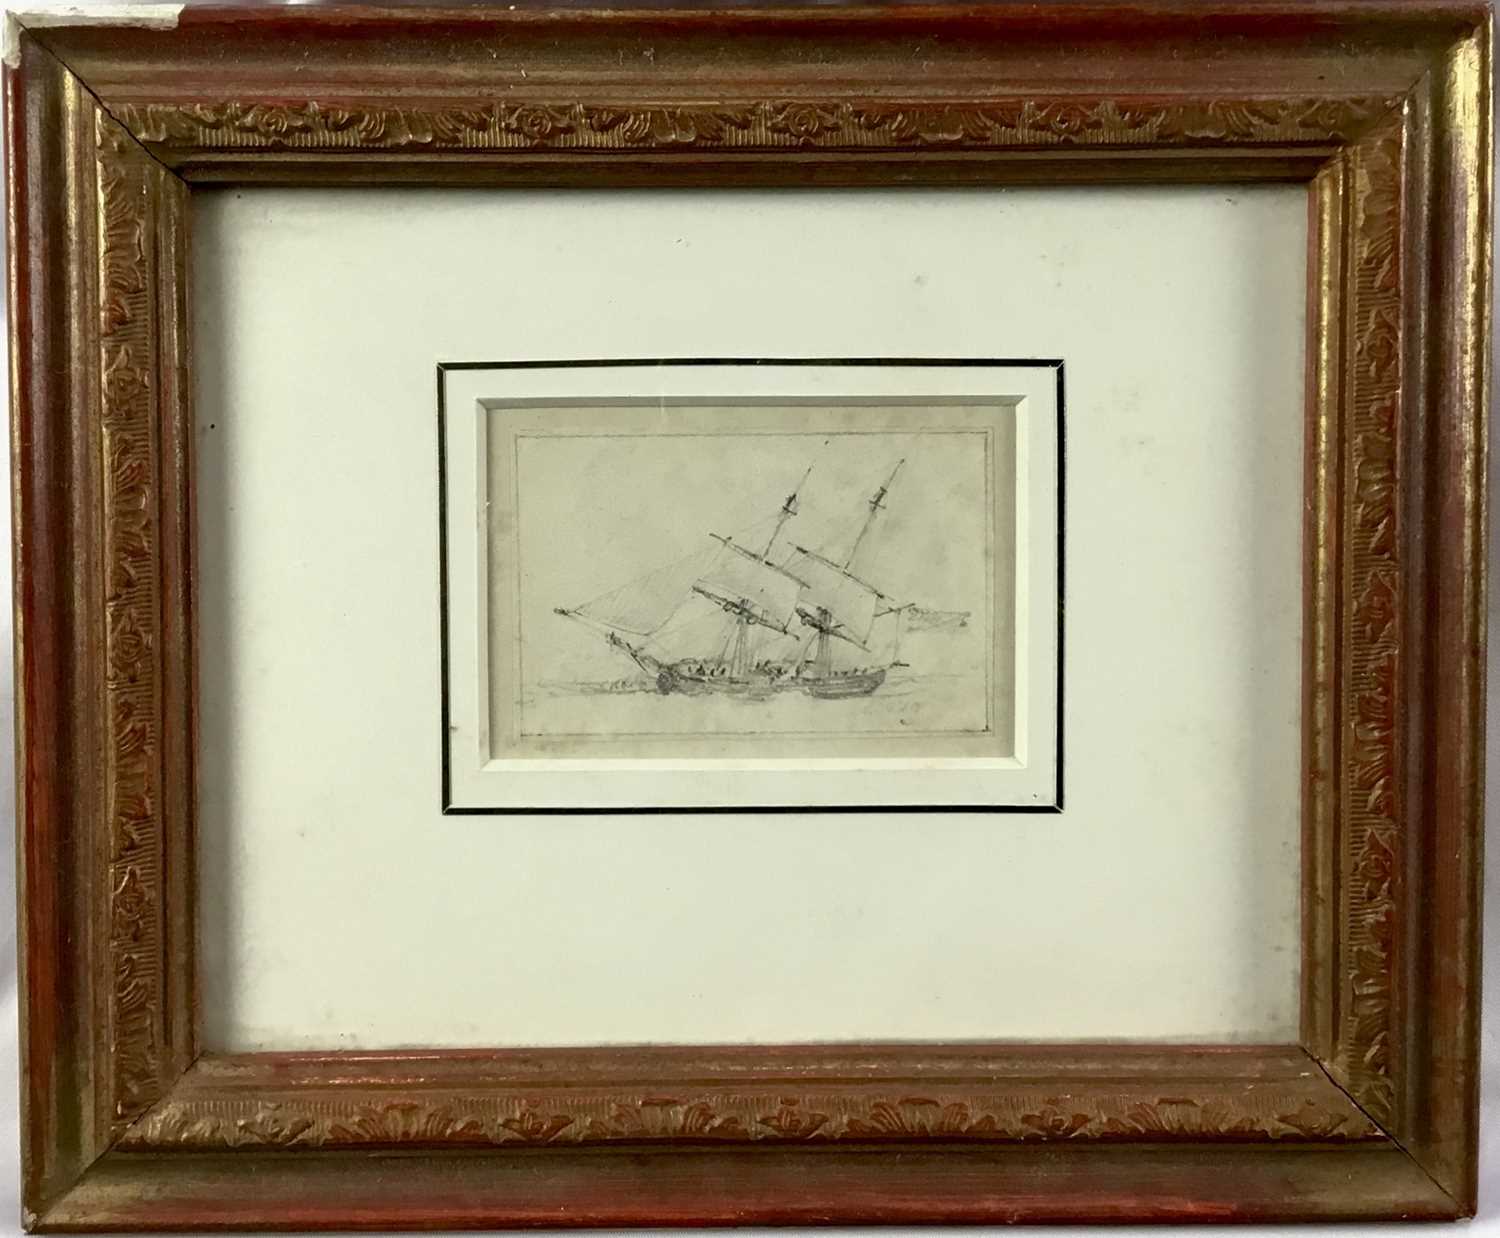 Lot 23 - Edward William Cooke  (1811-1880) marine pencil sketch, together with an etching